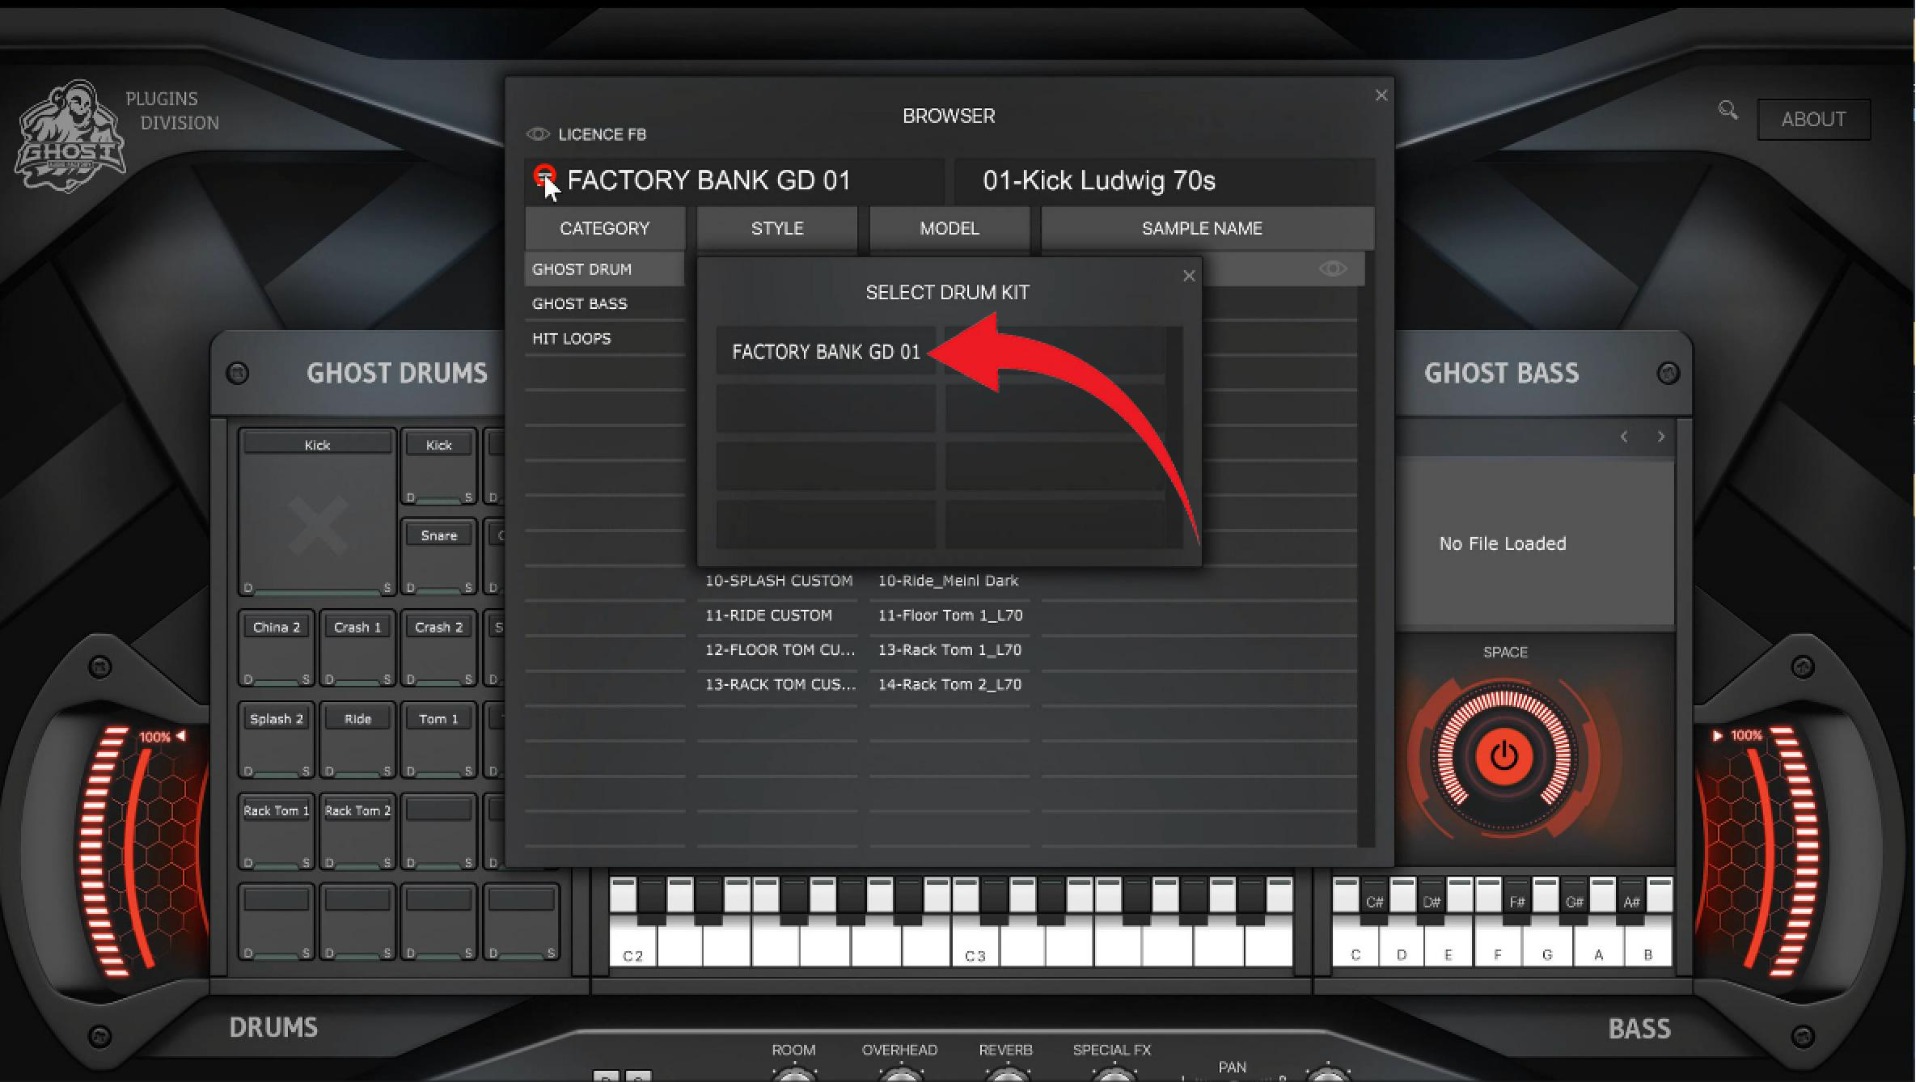 How to Authorization-Activation Drum Plugin Ghost Drums Step 13